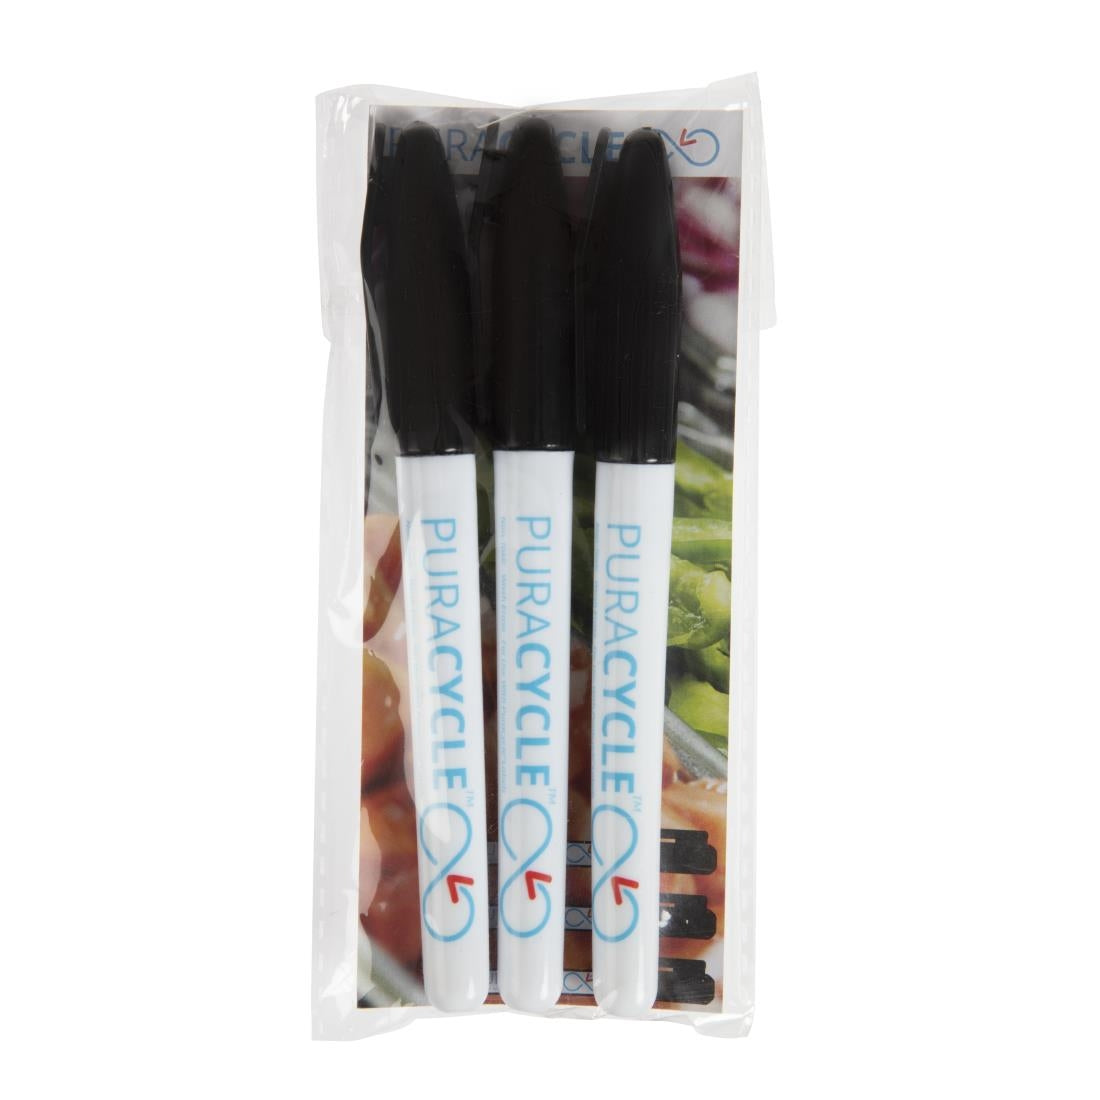 FB284 Puracycle Non-Toxic Marker Pens Black 3 Pack JD Catering Equipment Solutions Ltd